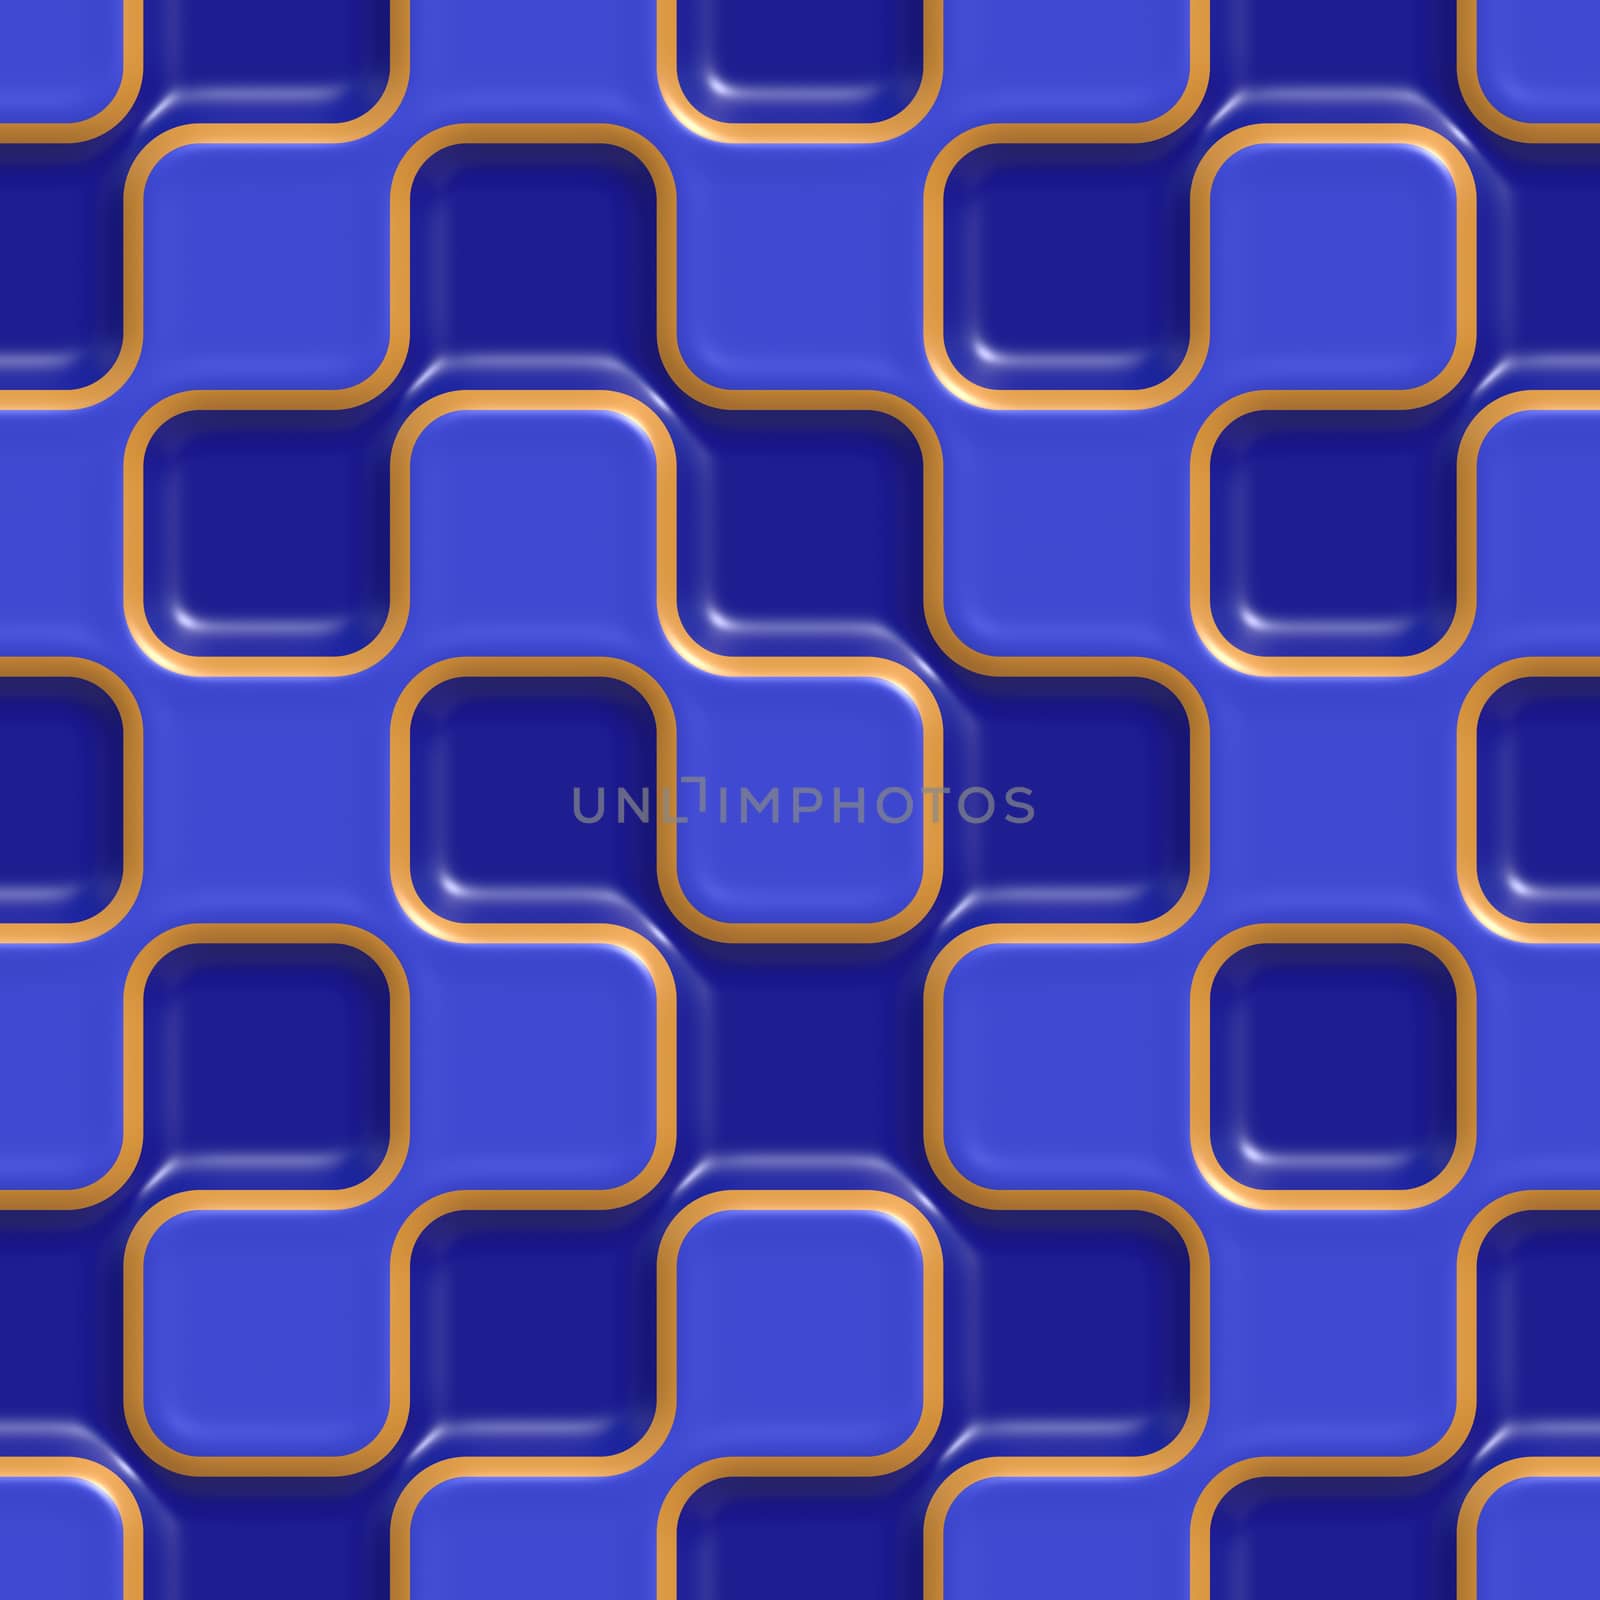 Seamless tileable decorative background pattern.